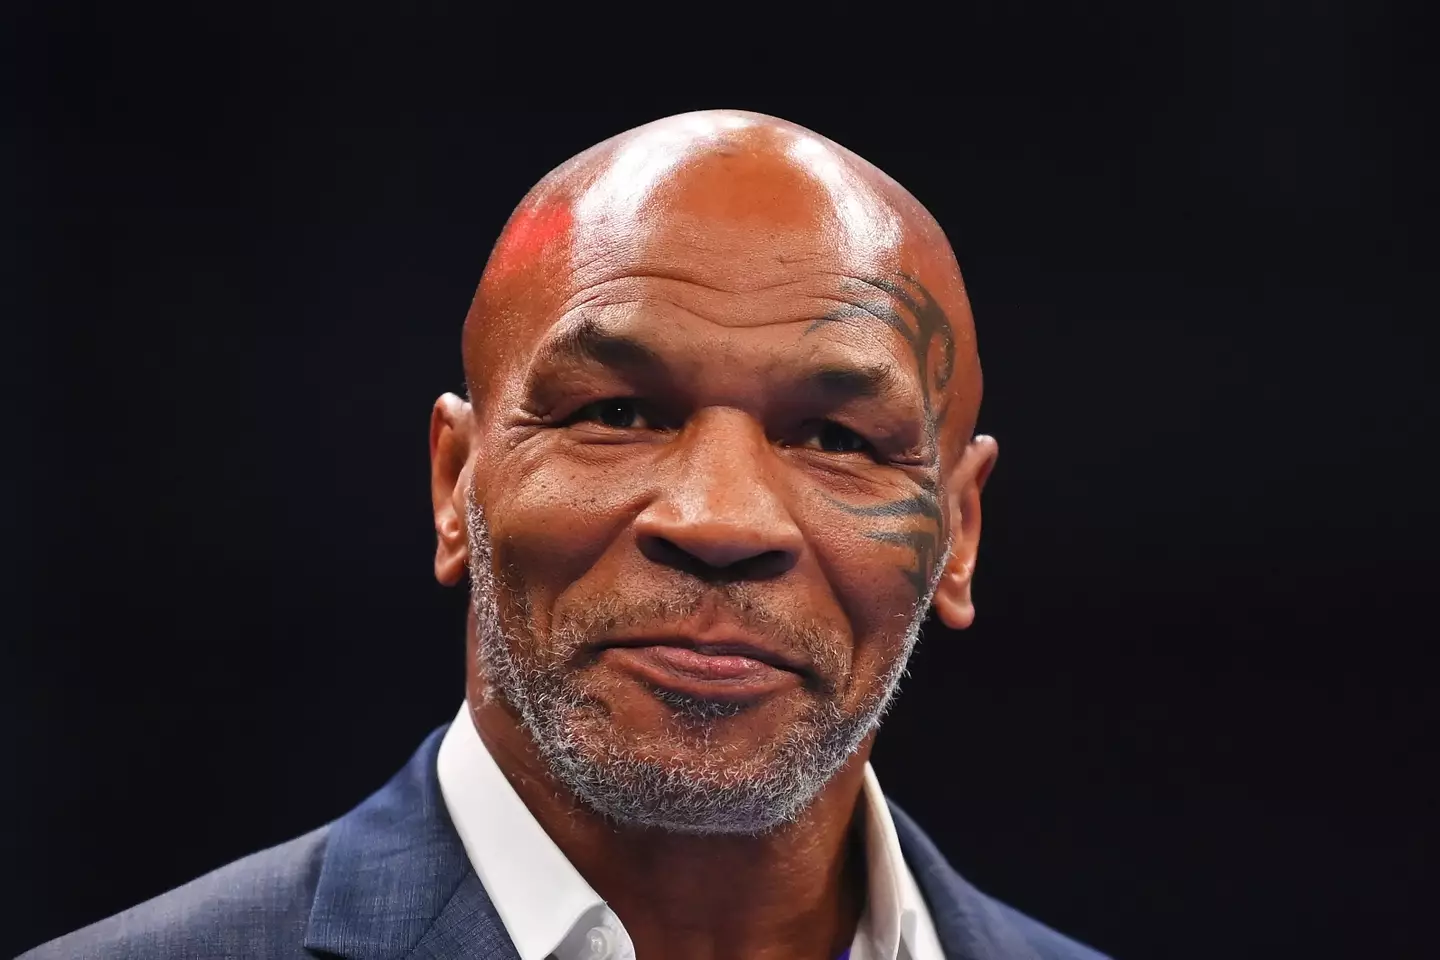 Mike Tyson has said he was 'wrong' for the way he acted.